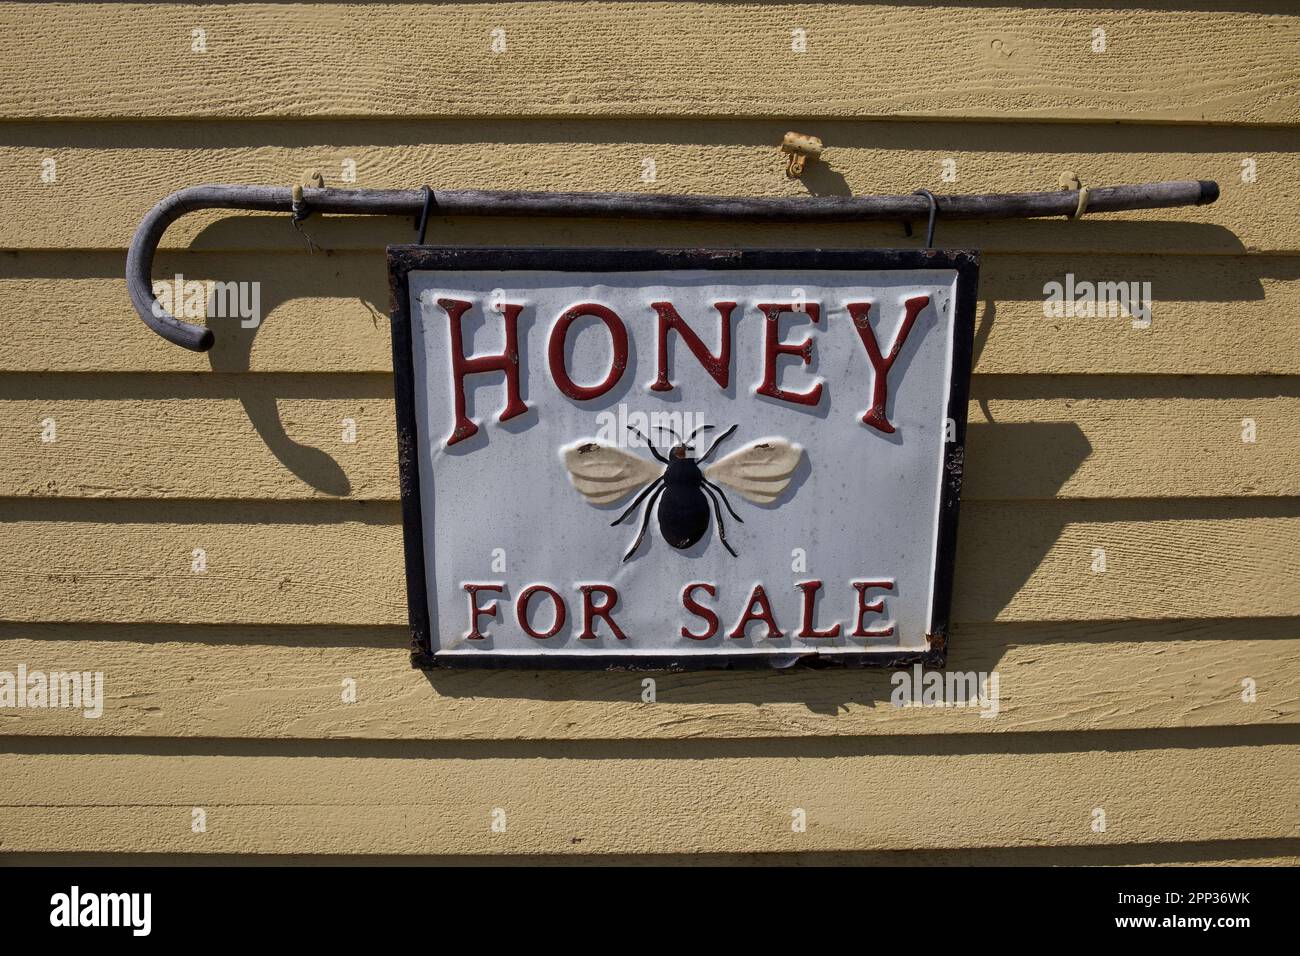 Haddam, Connecticut, USA:  building with metal sign that says HONEY FOR SALE. Bee on white sign that is held up by old walking cane. Stock Photo